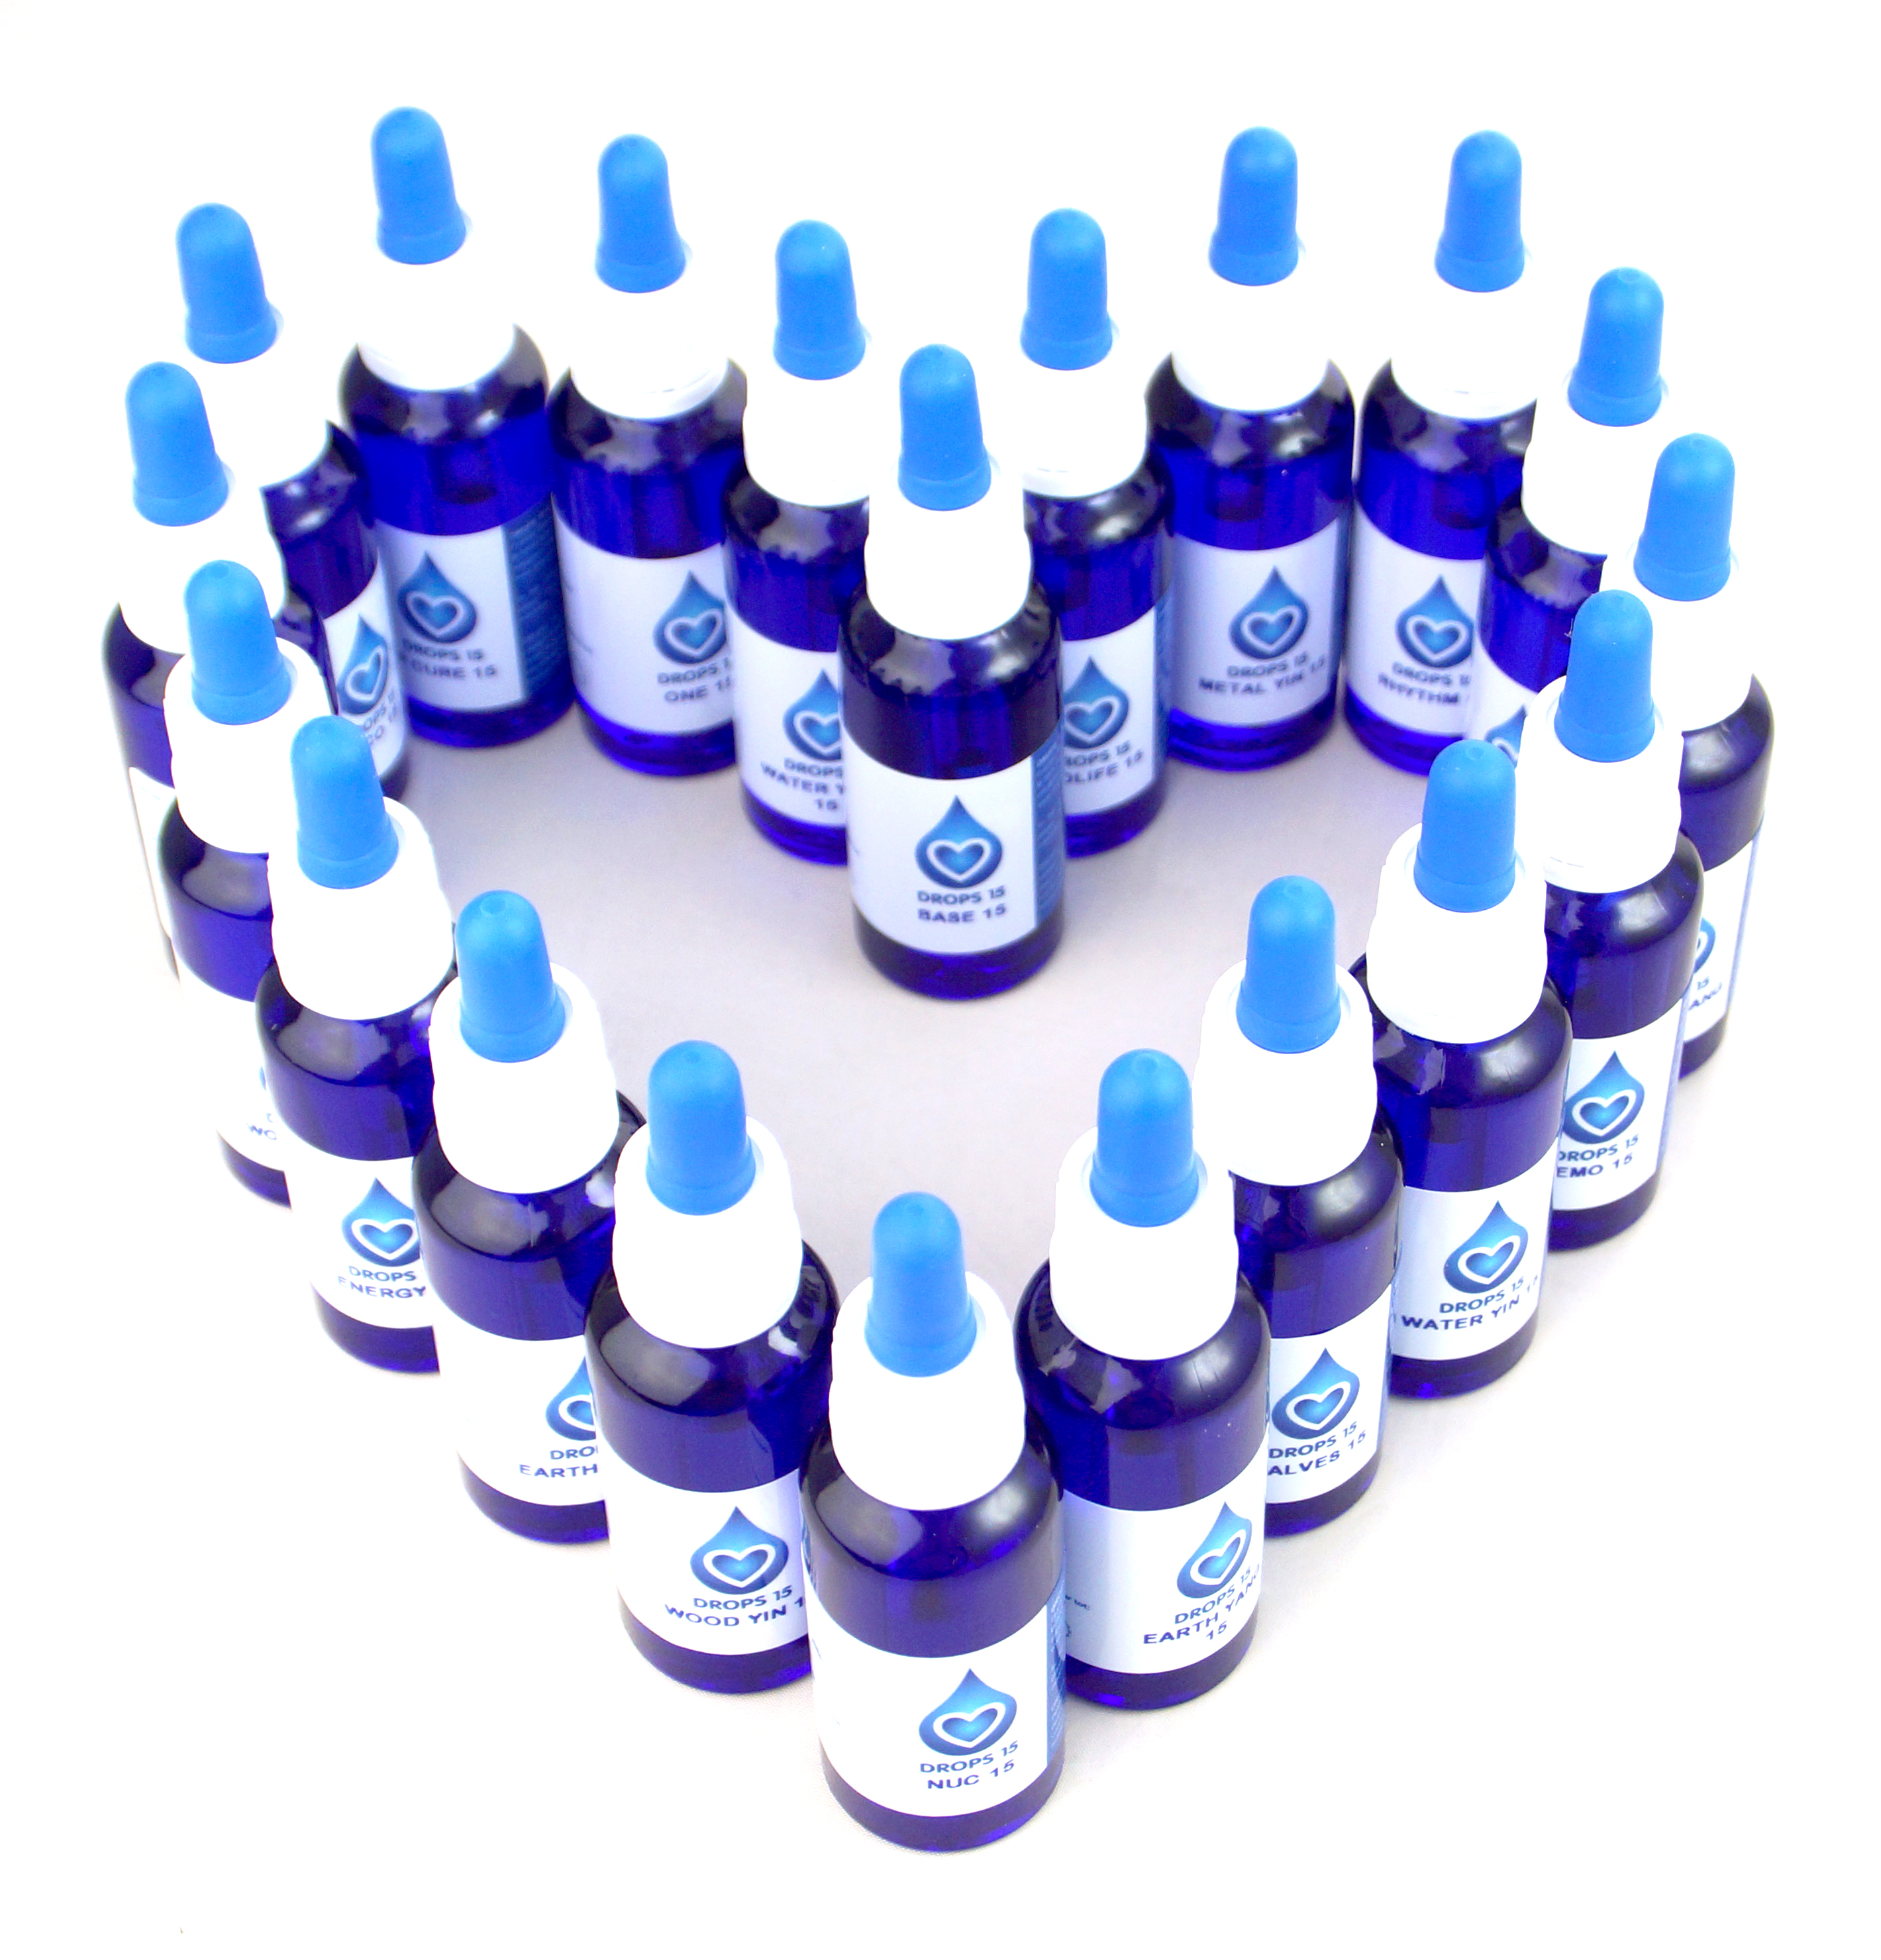 DROPS 15 energetic drops and infoceuticals forming a heart